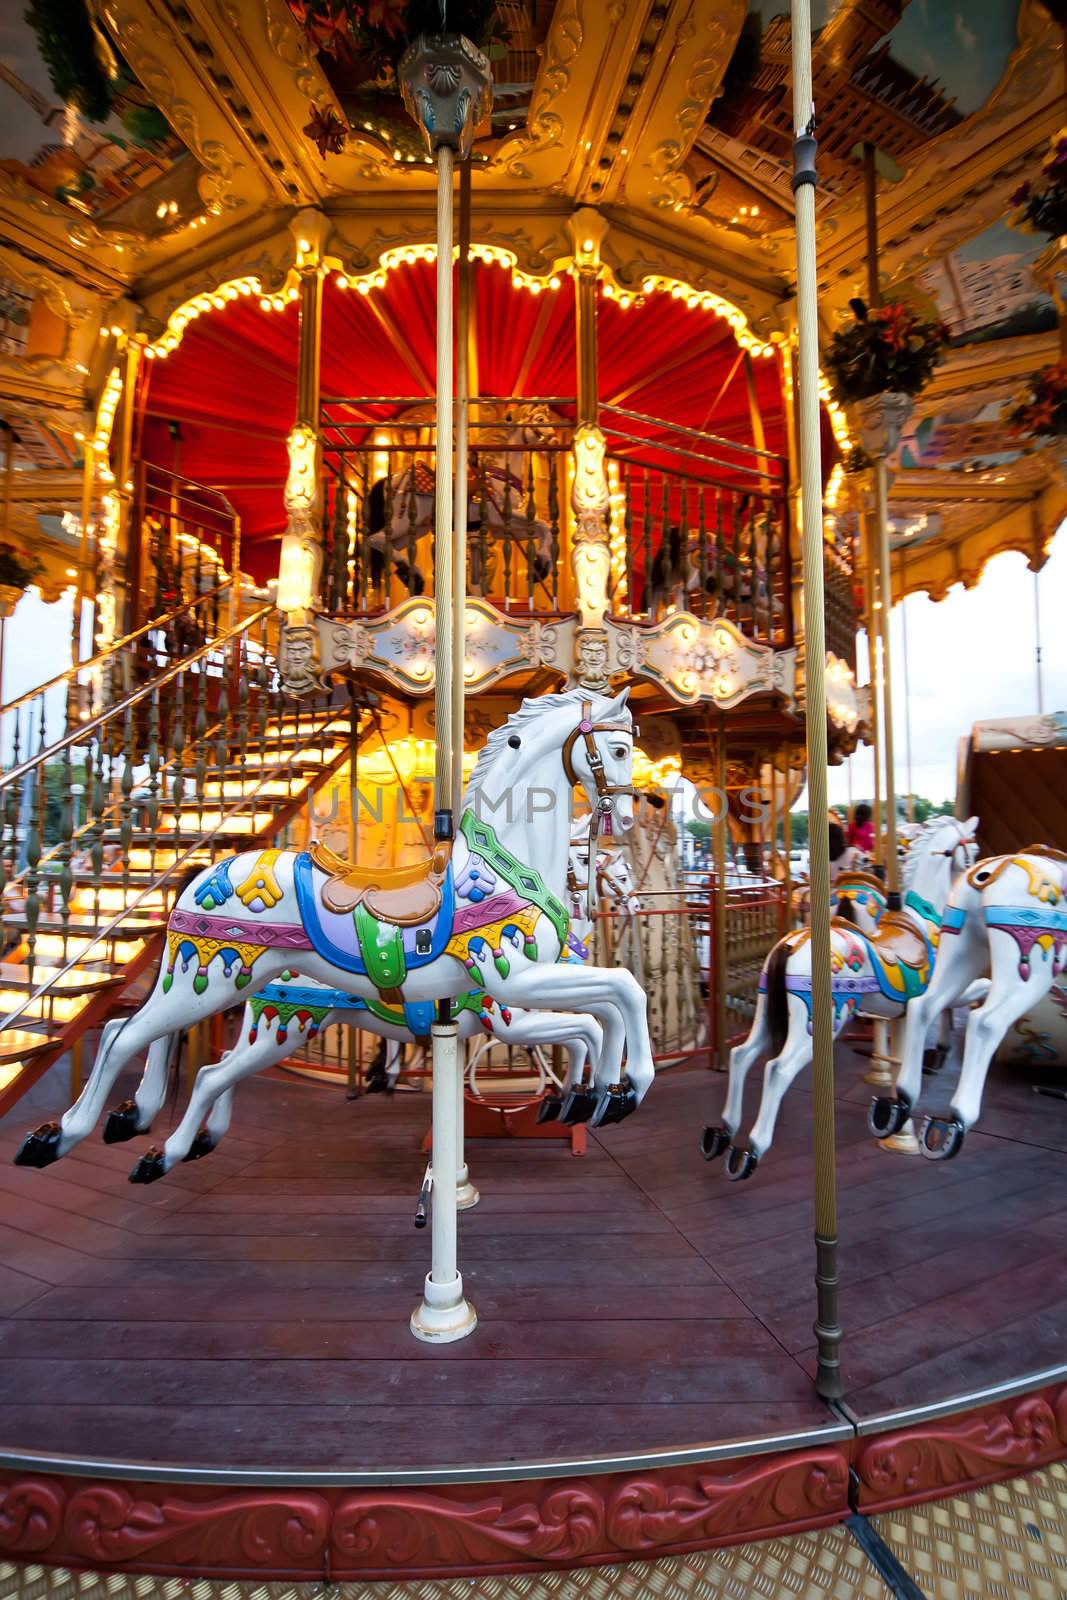 Colorful Carousel in Paris by furzyk73